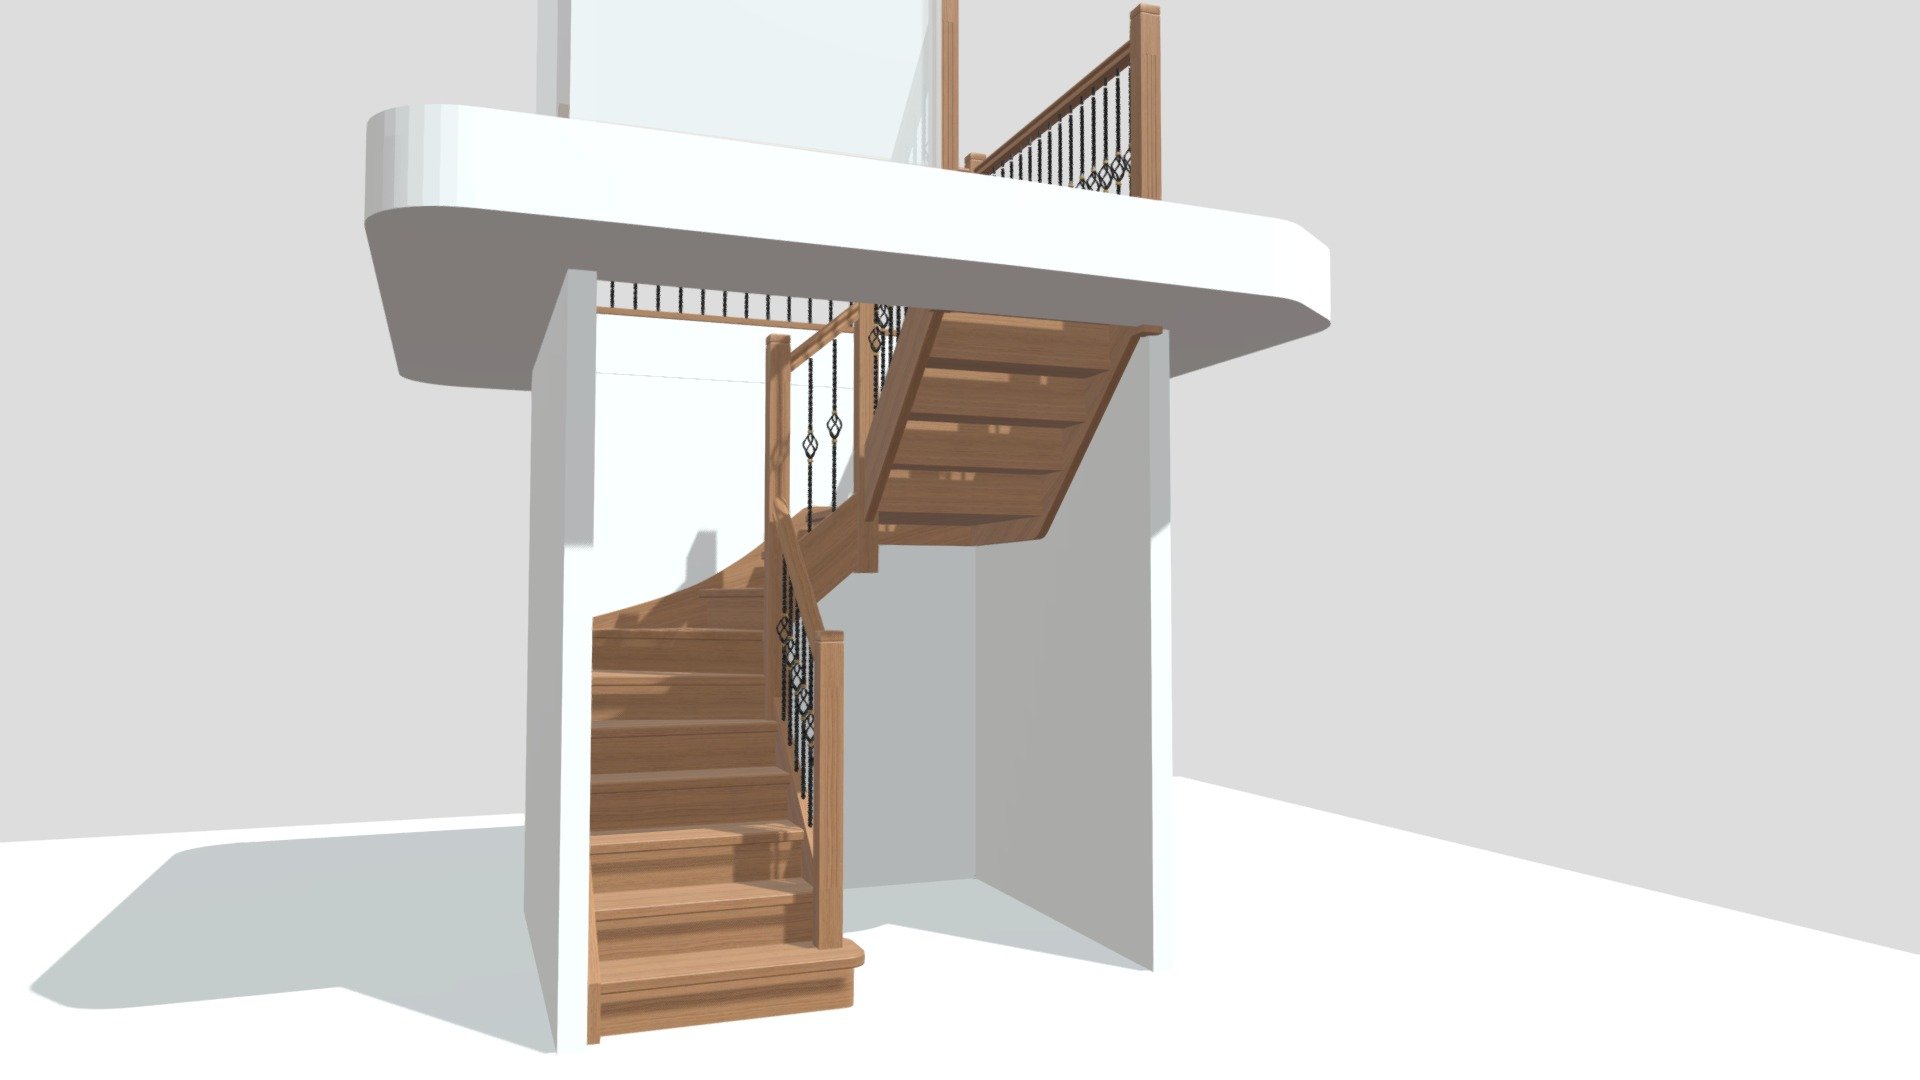 http://staircon.com/ 
Export by HBI Pawel Czerwonka (lic 6605) - Bola v1 - Download Free 3D model by Vonka Stairs Ltd (@vonka) 3d model